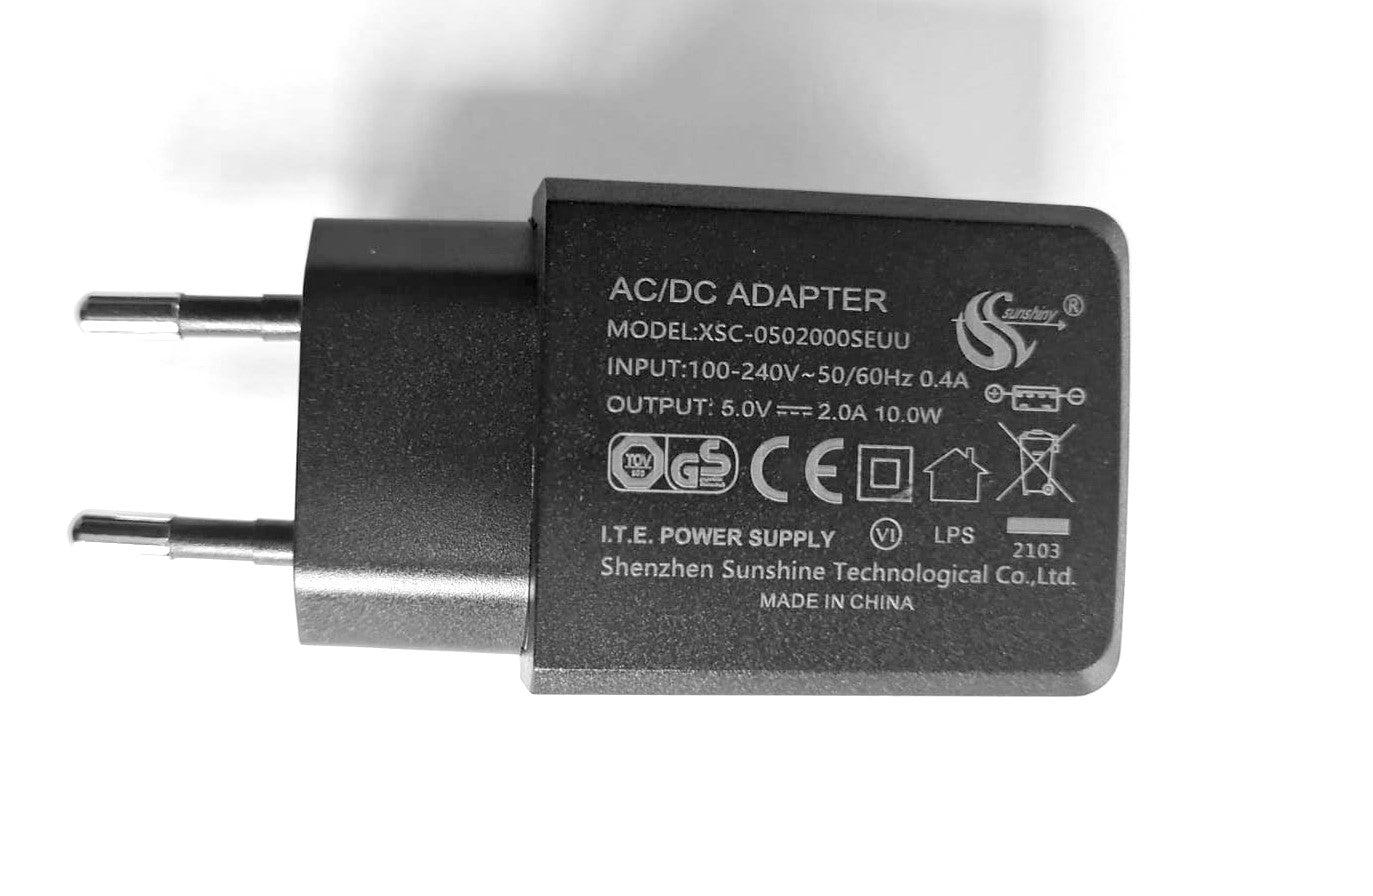 USB adapter - Outchair_GmbH